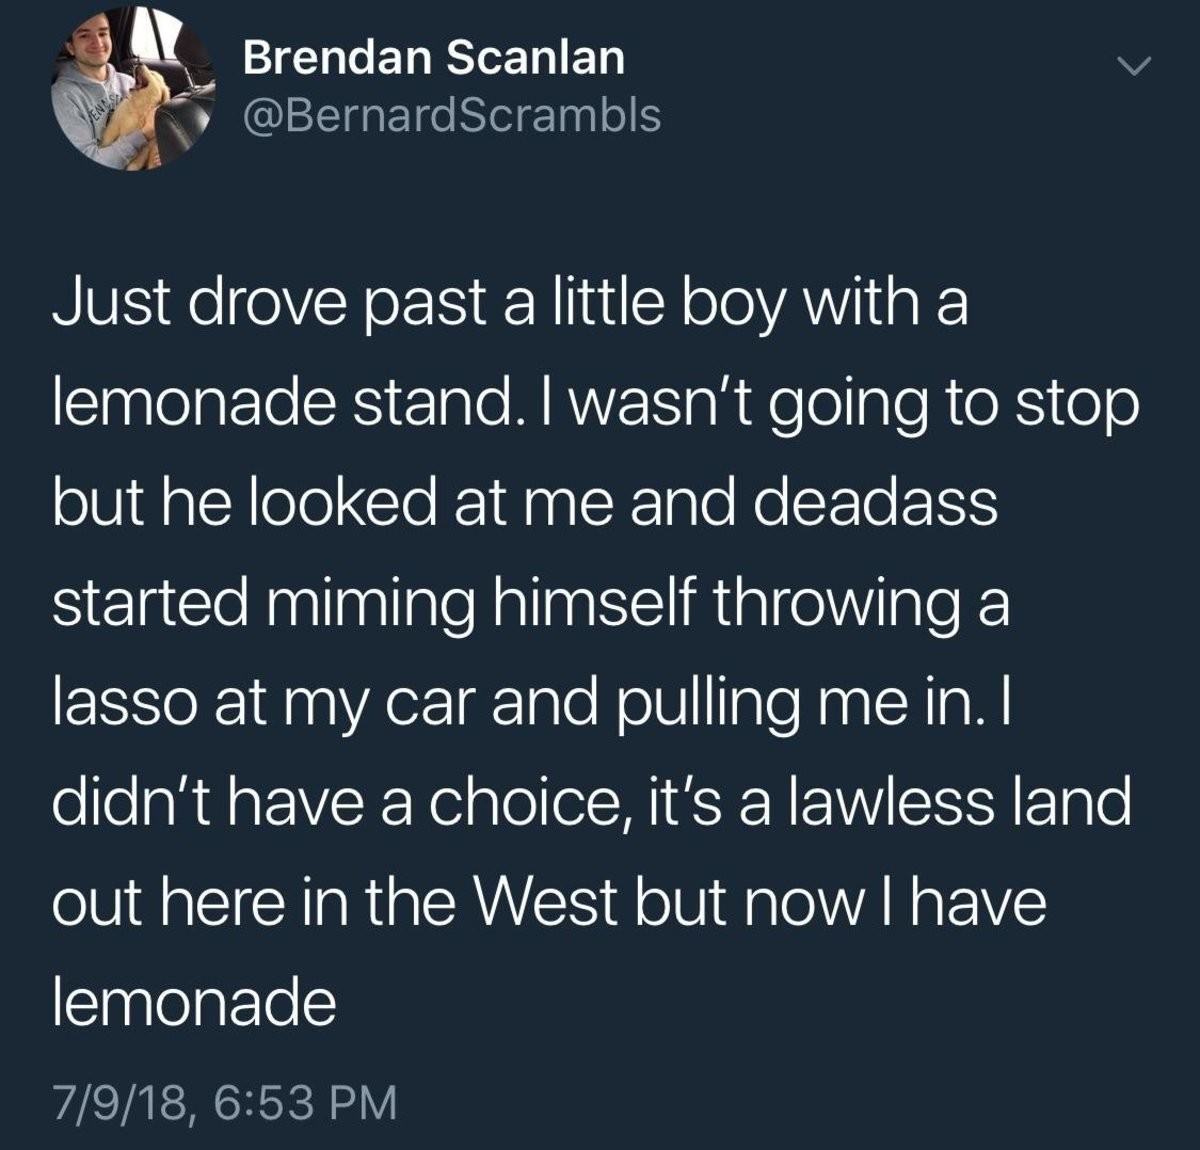 salah racist tweet - Brendan Scanlan Just drove past a little boy with a lemonade stand. I wasn't going to stop but he looked at me and deadass started miming himself throwing a lasso at my car and pulling me in. I didn't have a choice, it's a lawless lan